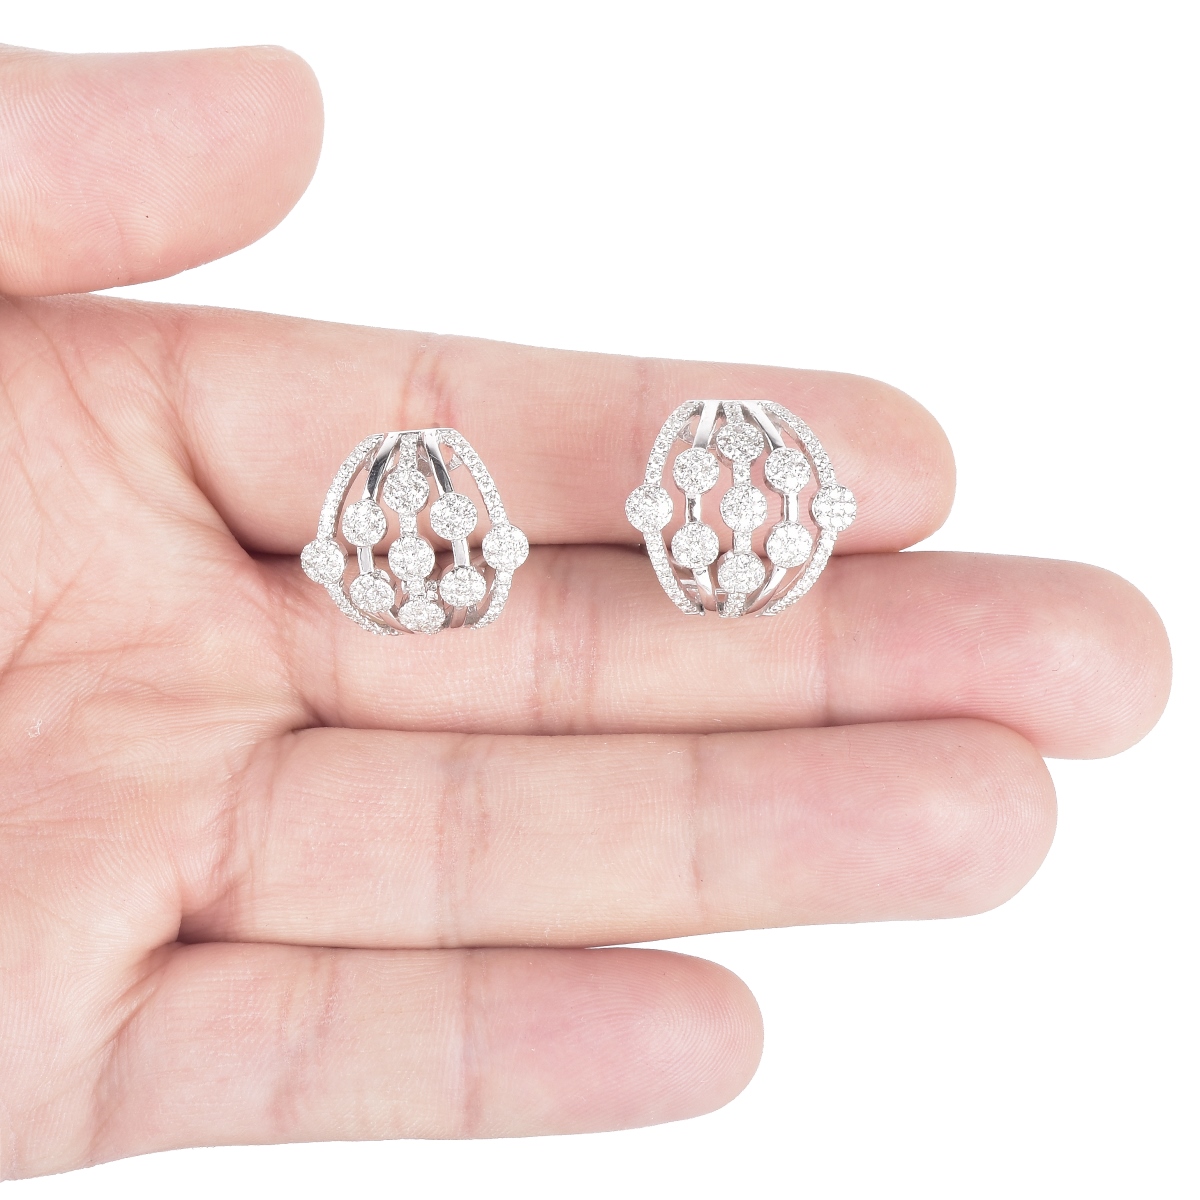 2.0ct Diamond and 14K Gold Earrings.